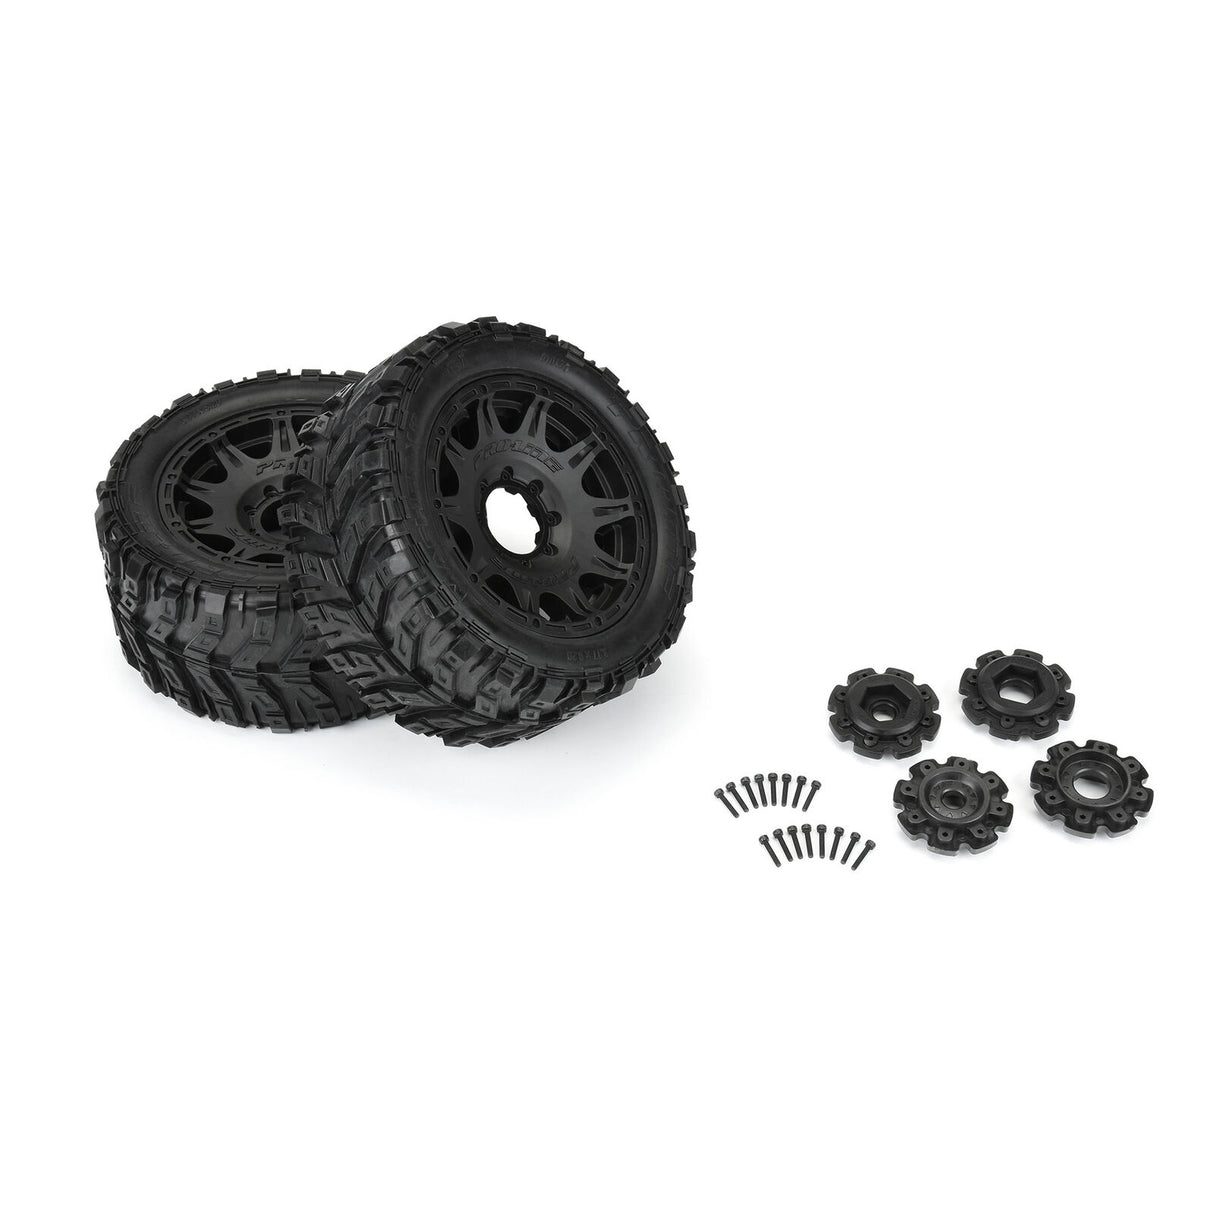 Pro-Line 1/6 Masher X HP Belted Tire & Wheel Set (5.7" / 24mm Hex / 2pcs)